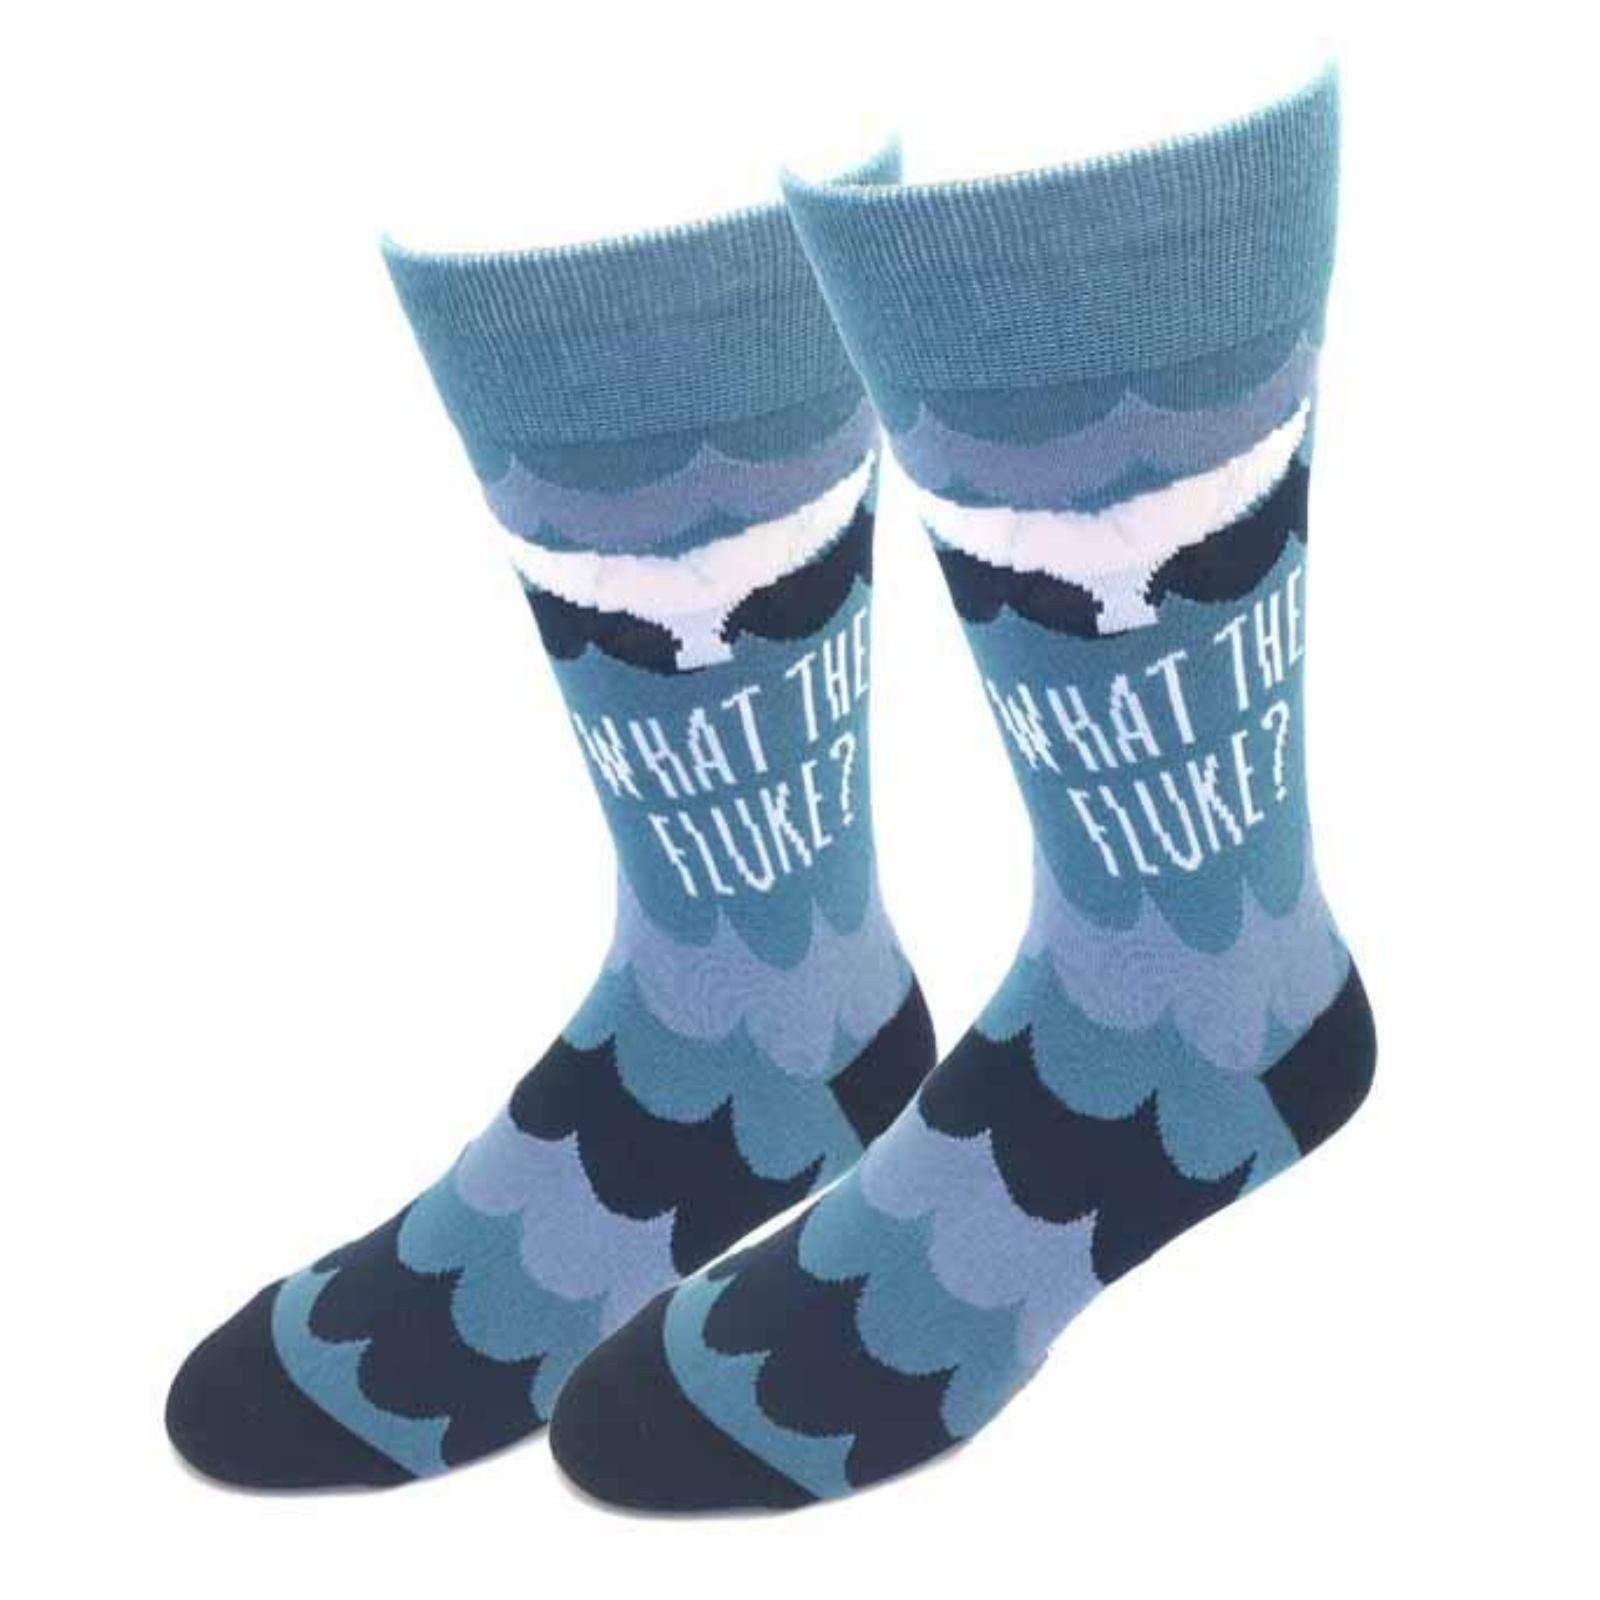 Sock Harbor What the Fluke? men's sock featuring blue sock with wave pattern and whale tale with "What the Fluke?"